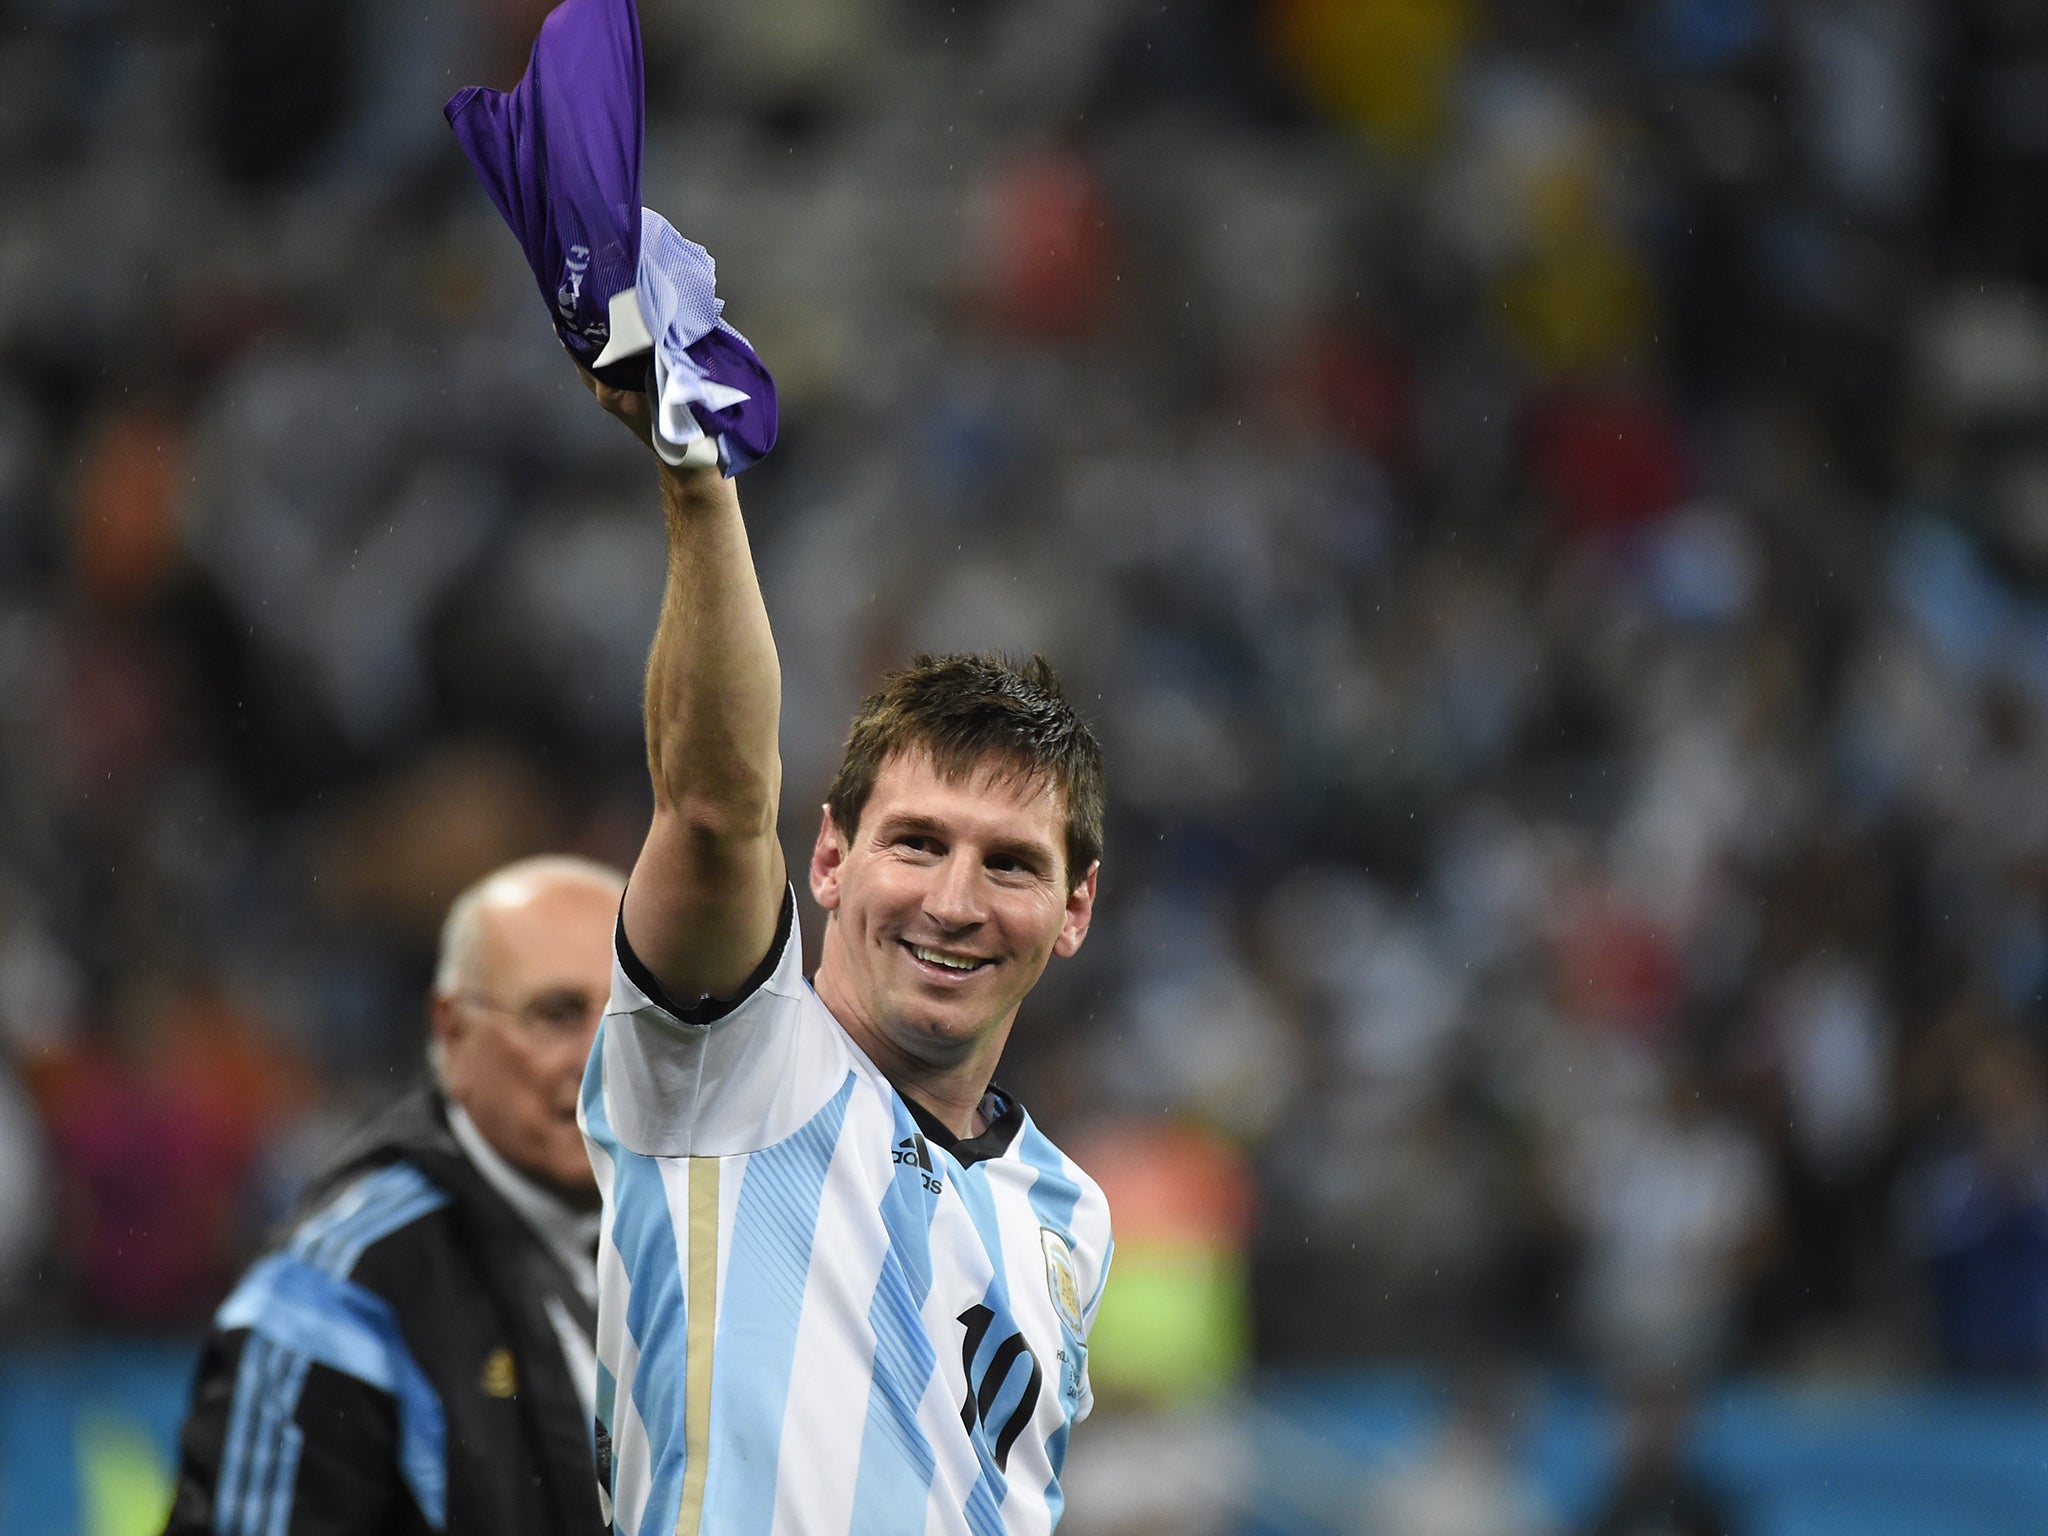 Lionel Messi pictured after reaching the final